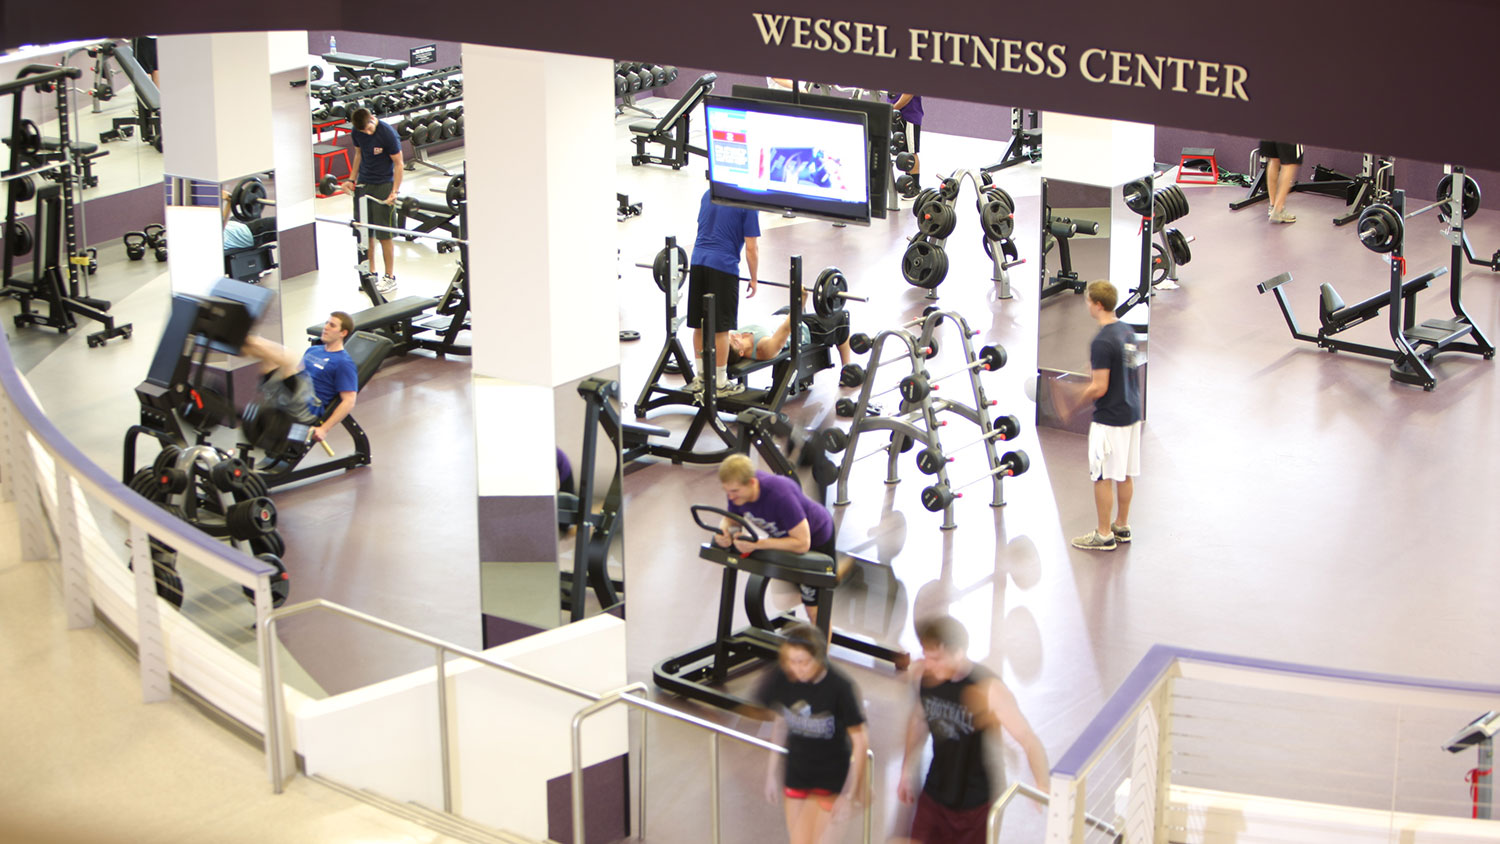 Students in the ACU fitness center